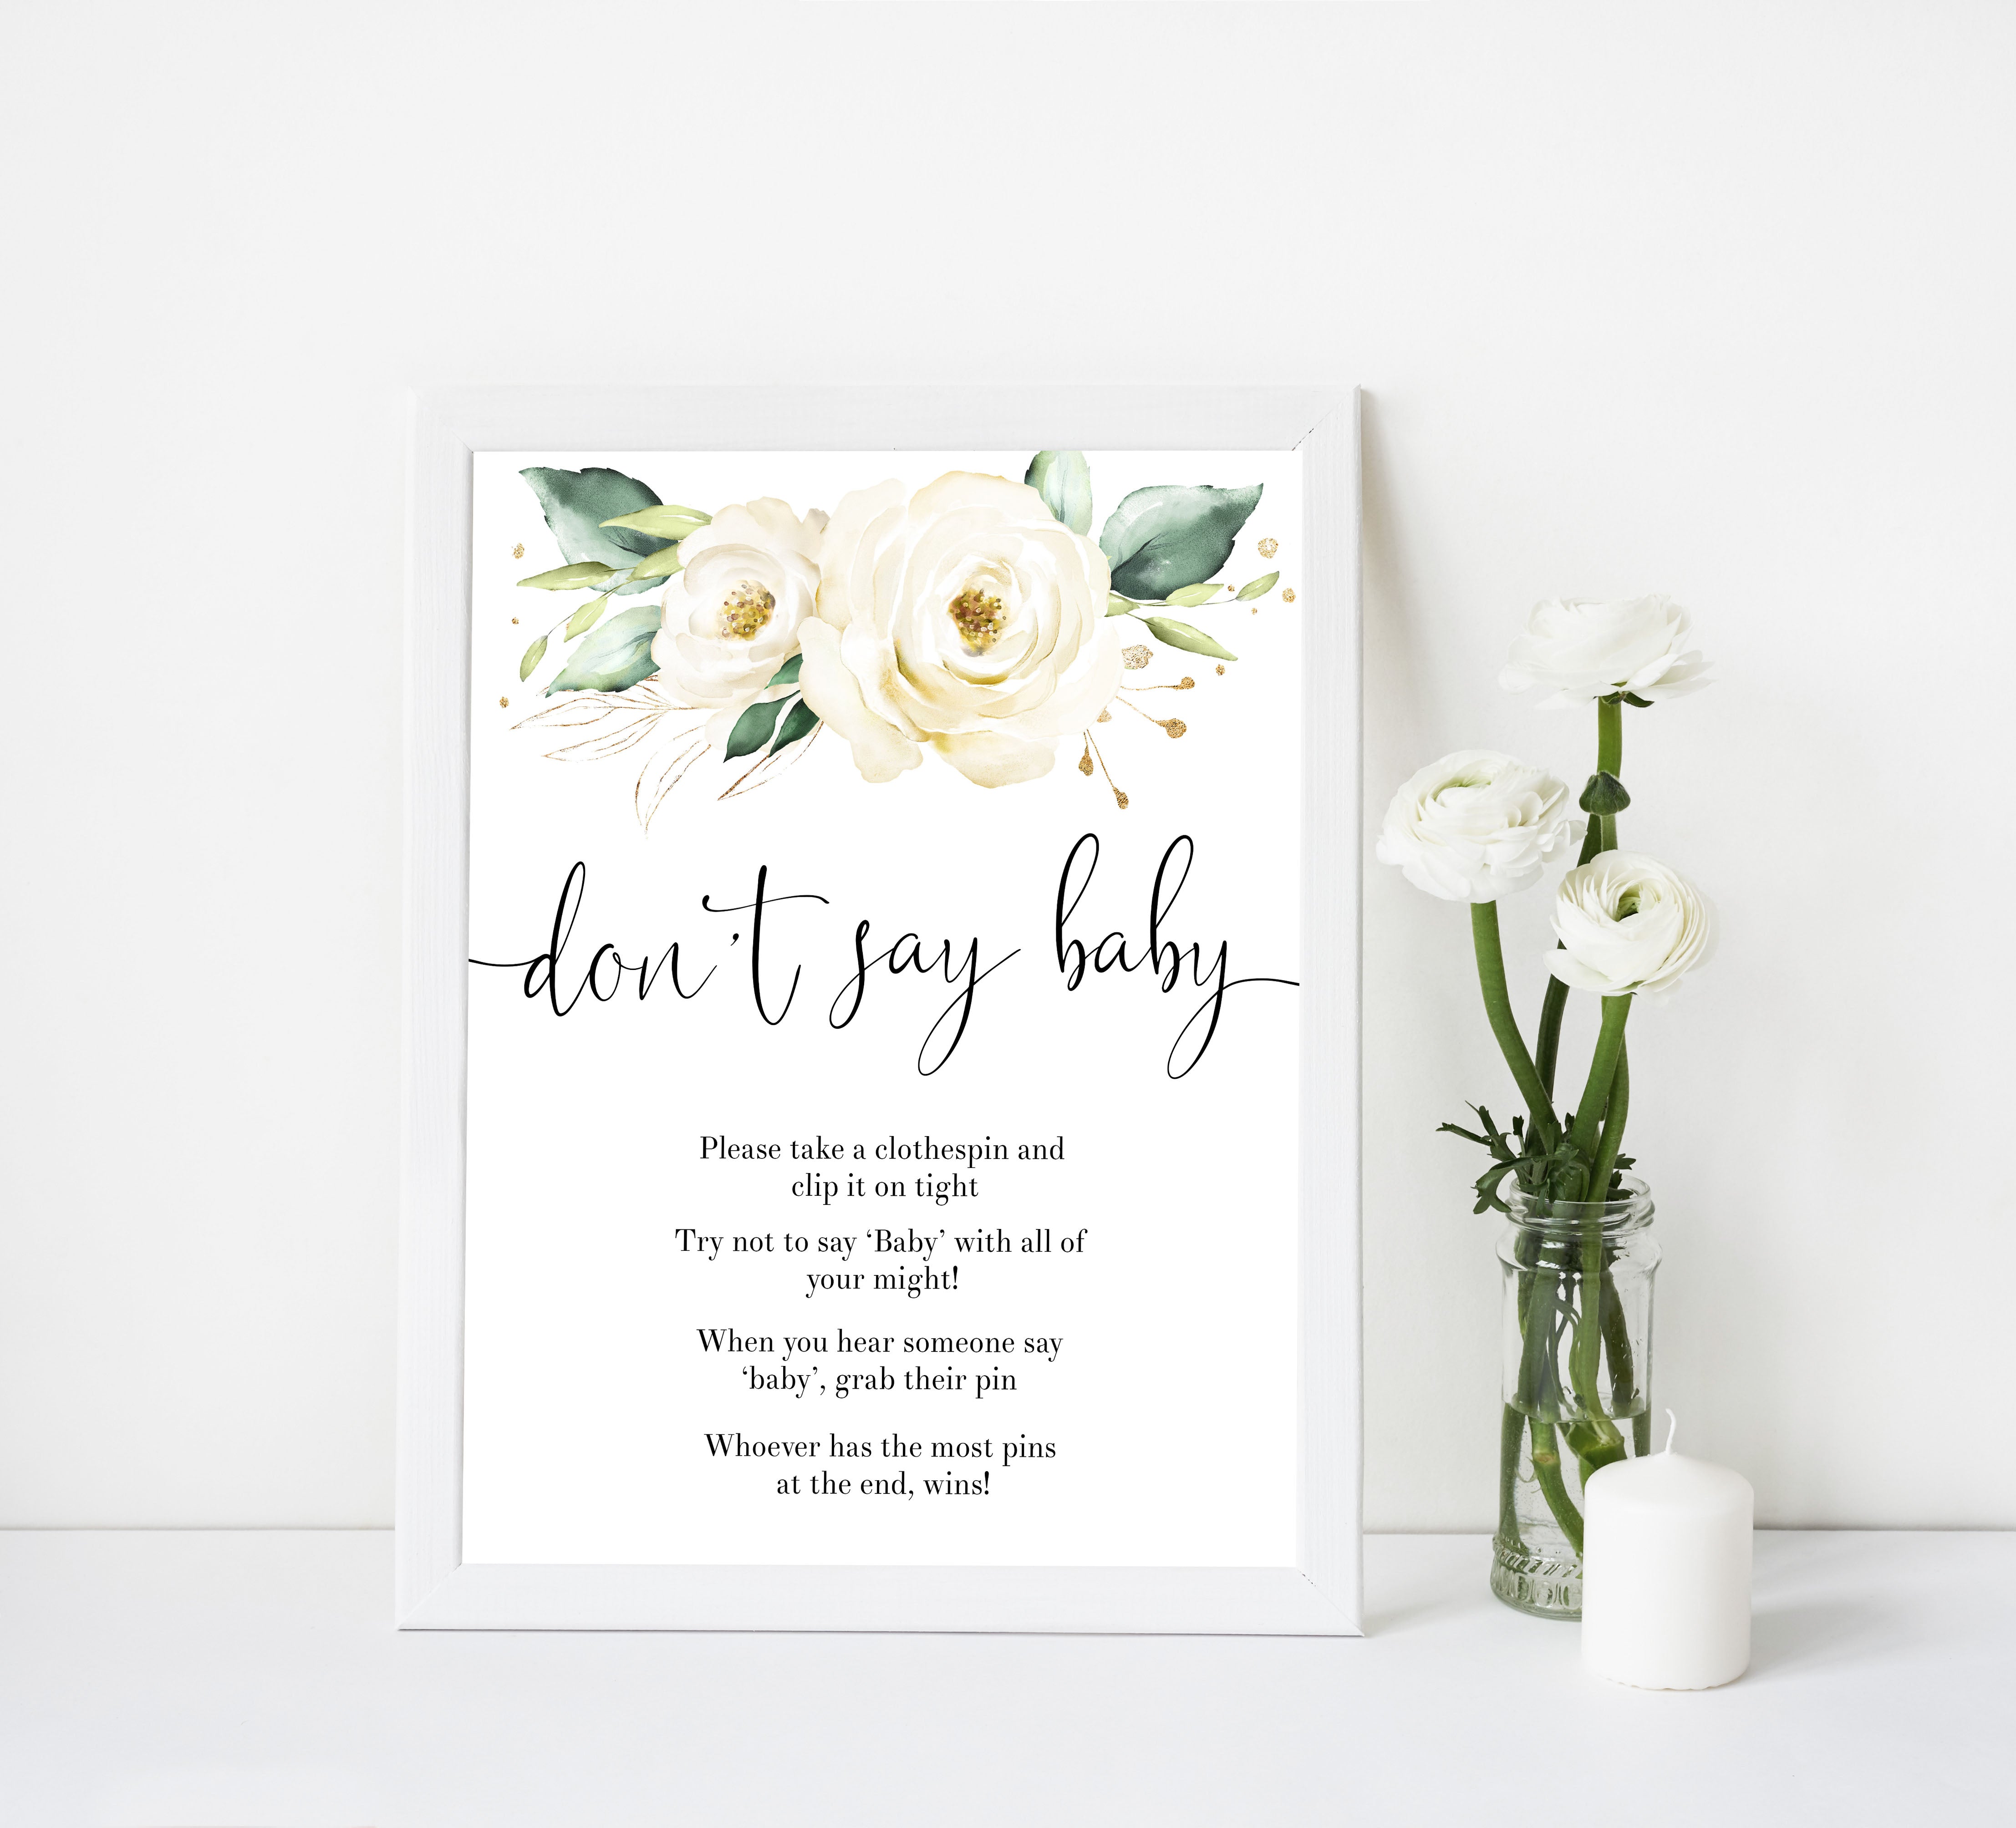 dont say baby game, Printable baby shower games, shite floral baby games, baby shower games, fun baby shower ideas, top baby shower ideas, floral baby shower, baby shower games, fun floral baby shower ideas